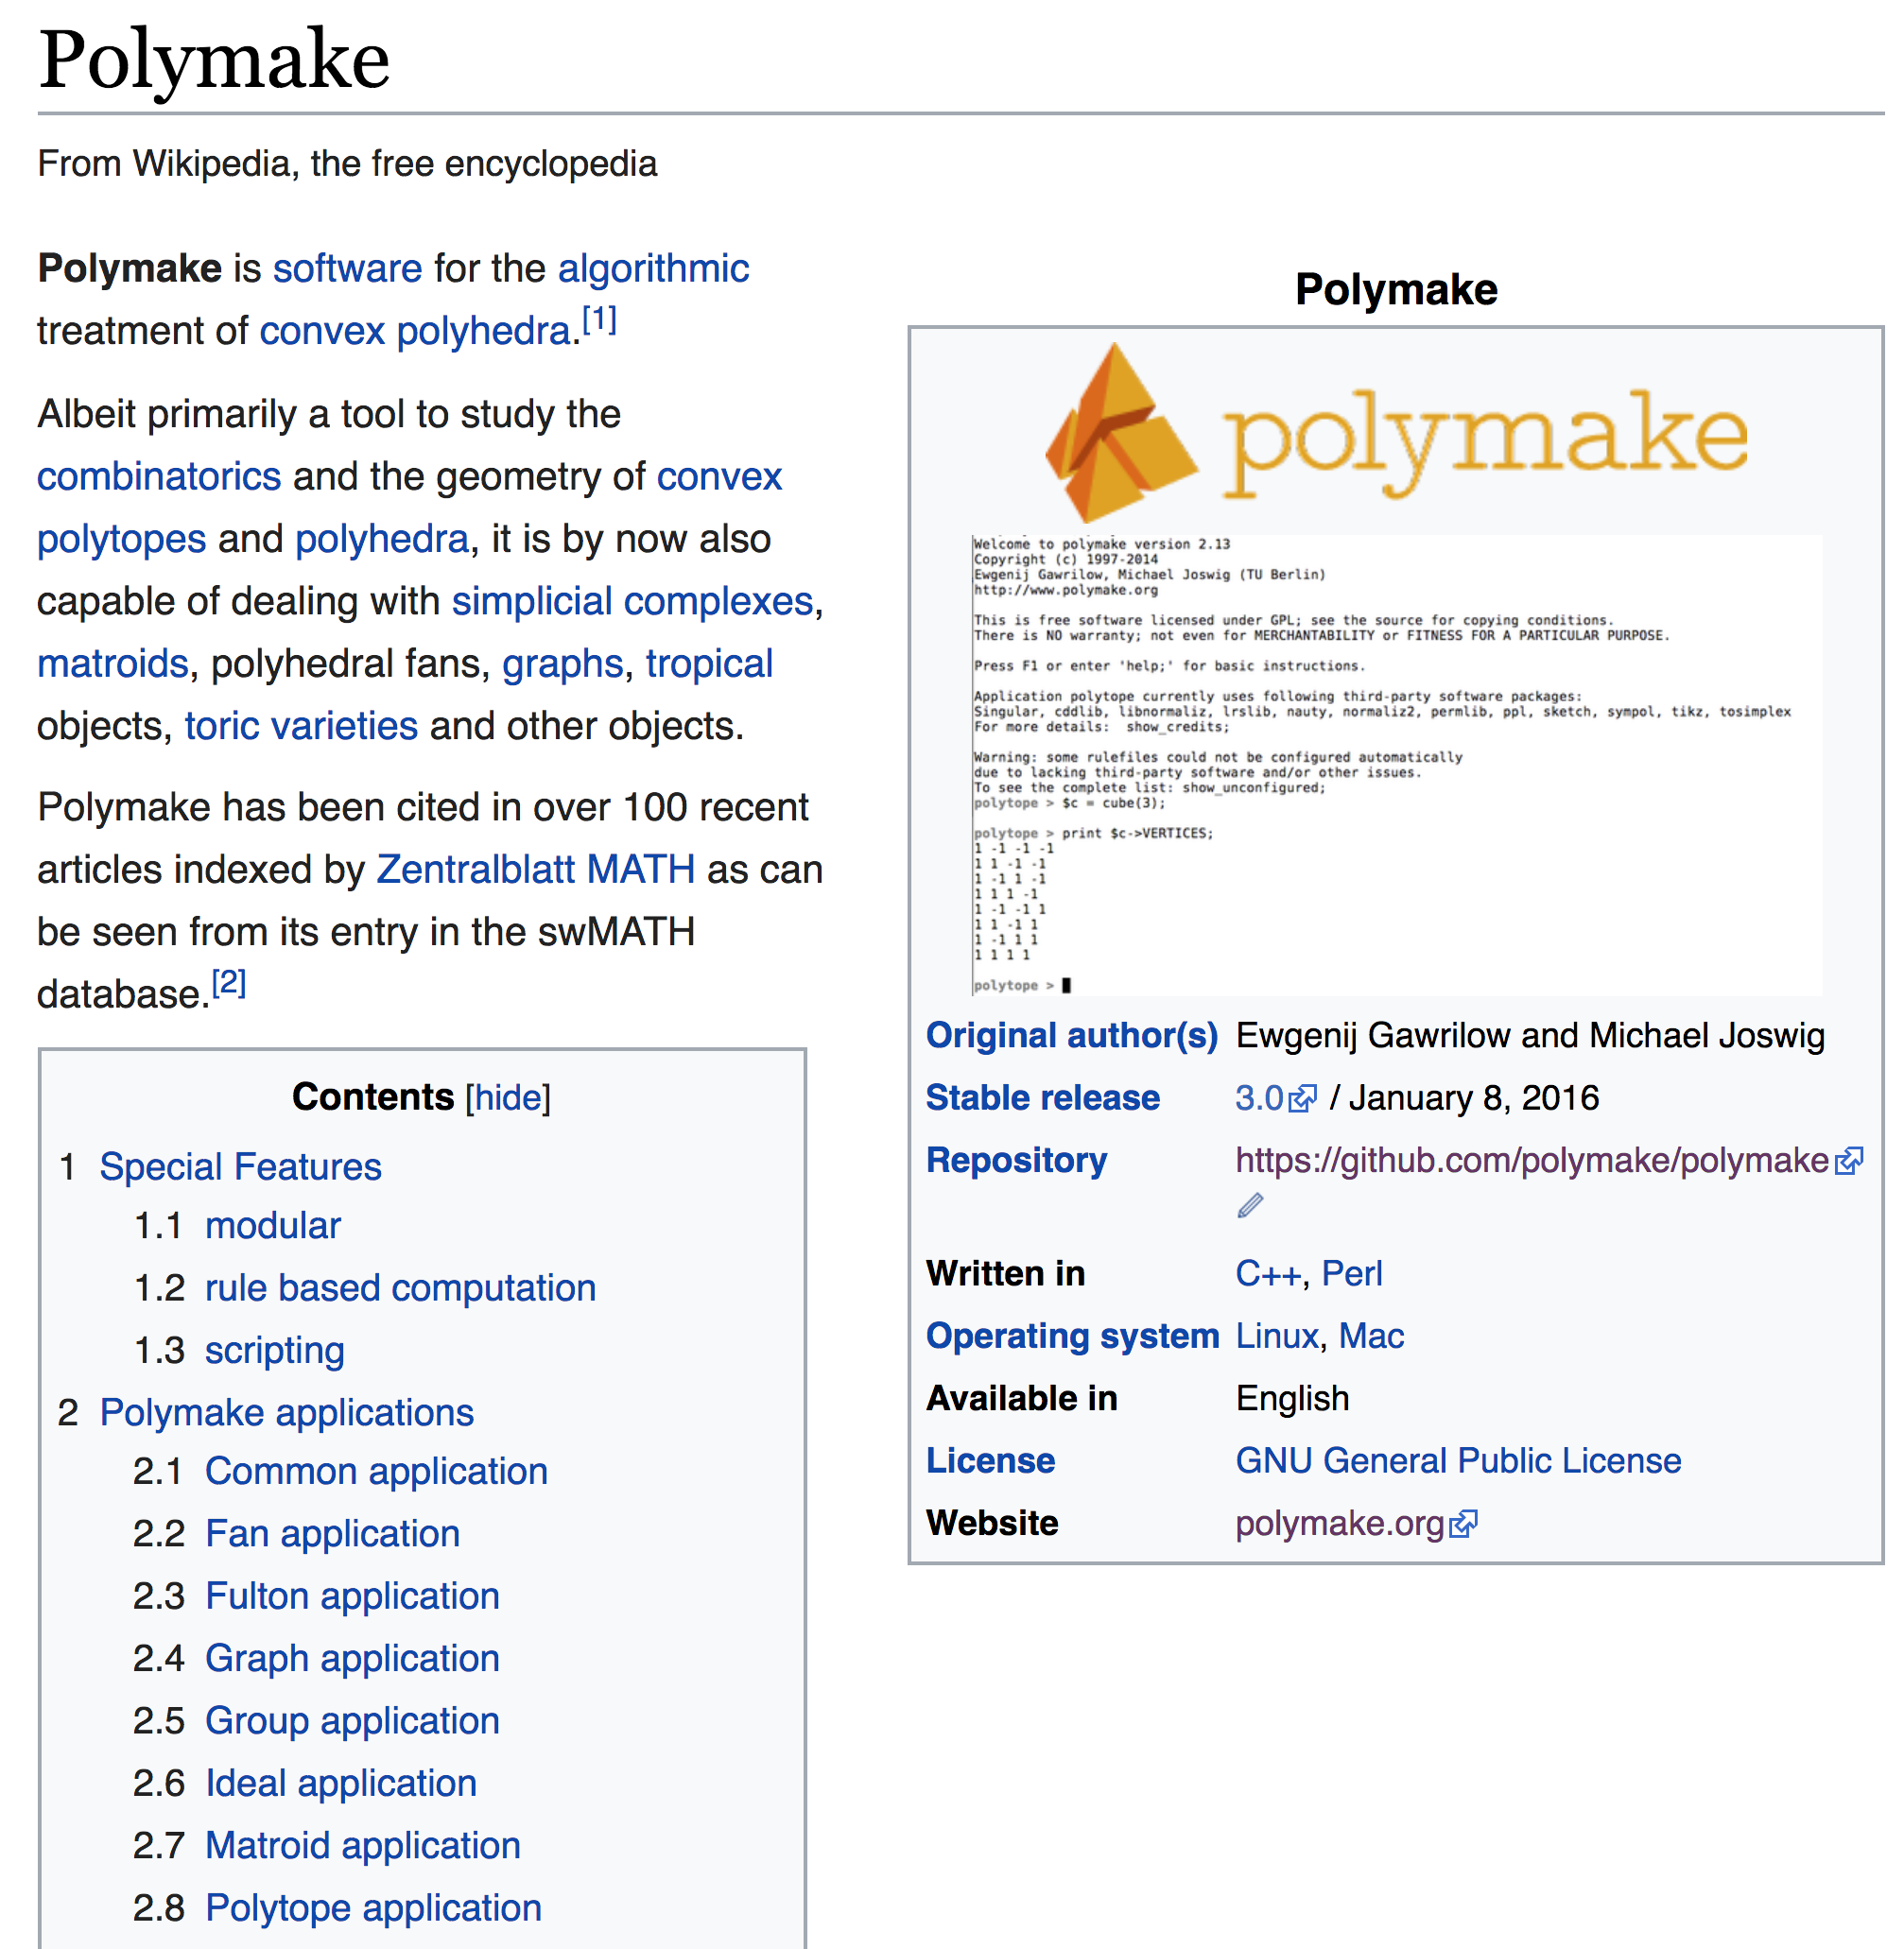 _images/polymake-wiki.png